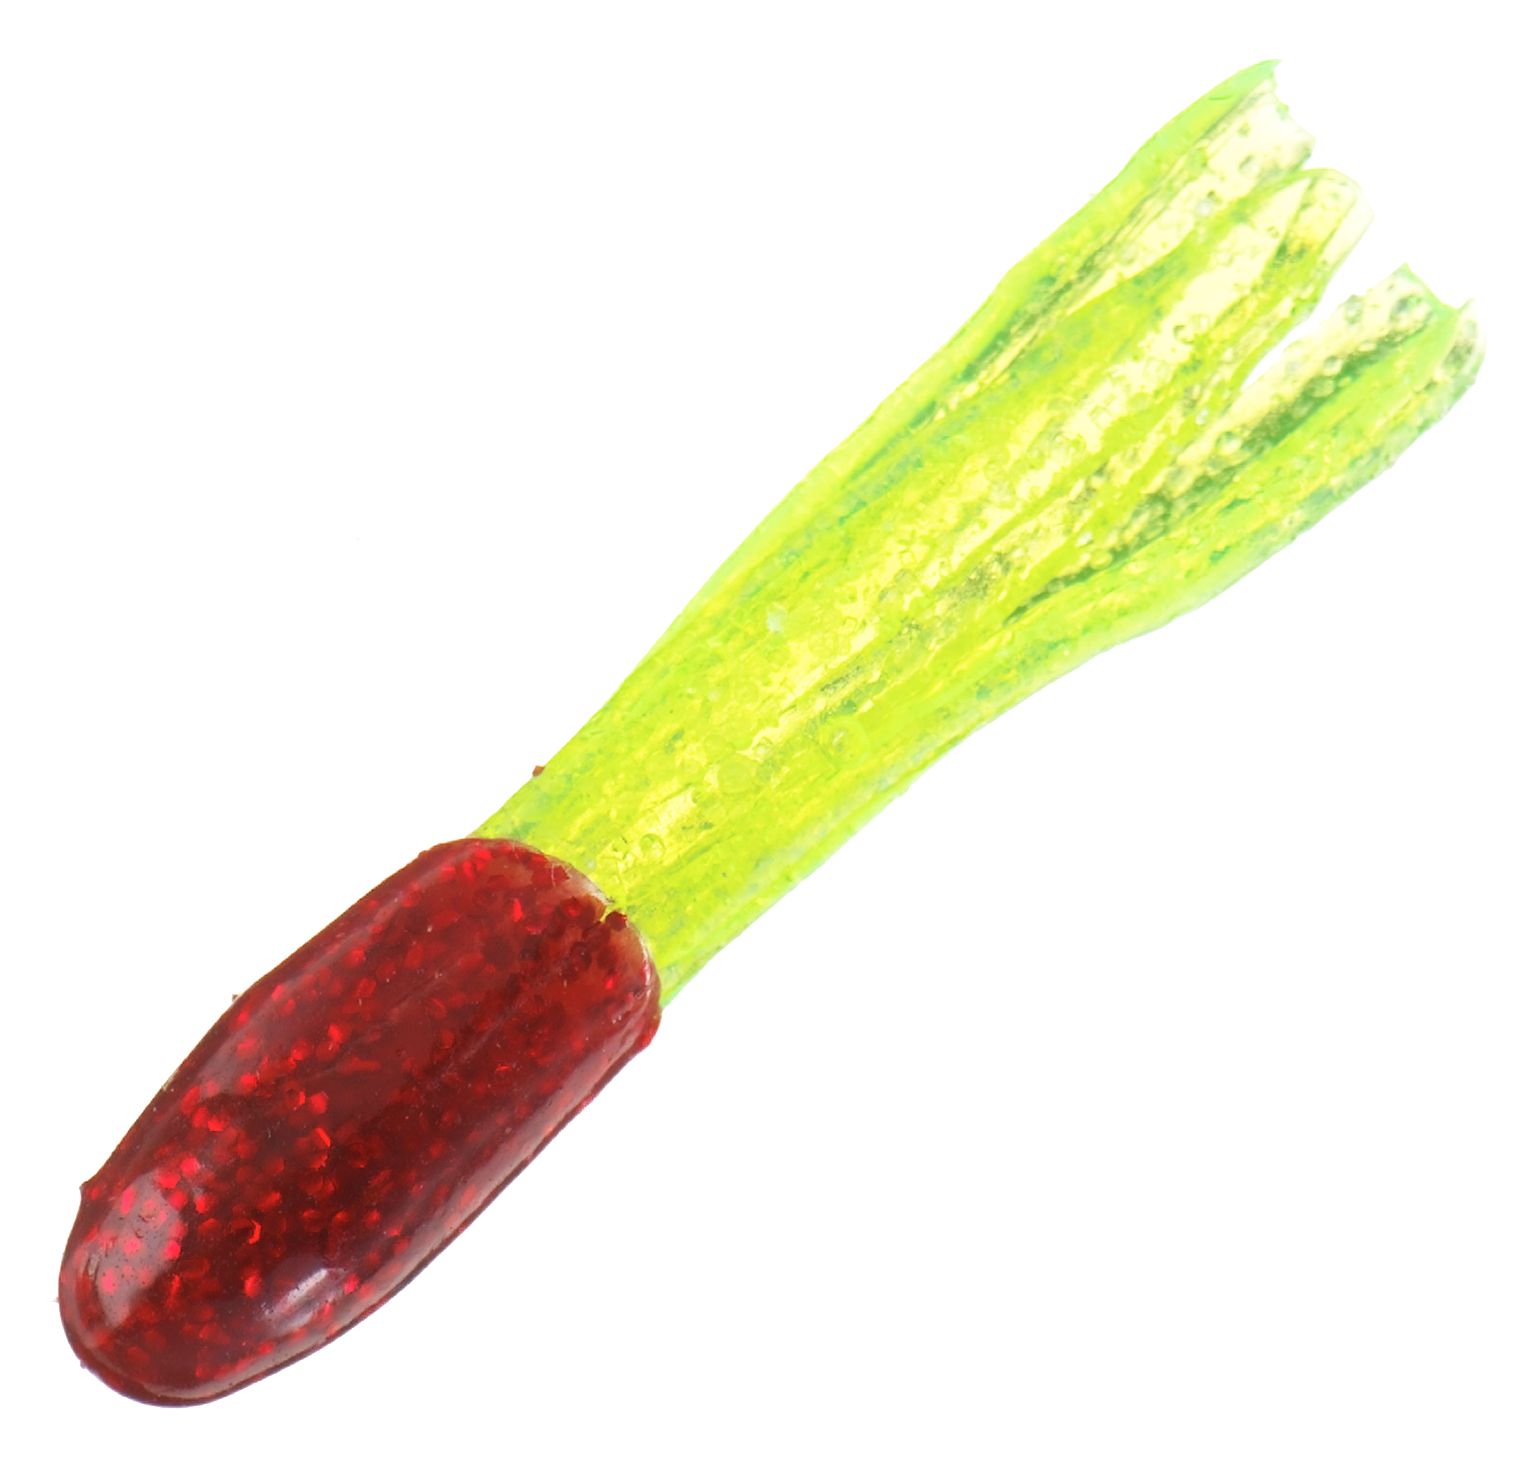 Bass Pro Shops Sparkle Squirts - 2"" - 10 pack - Electric Red/Chartreuse